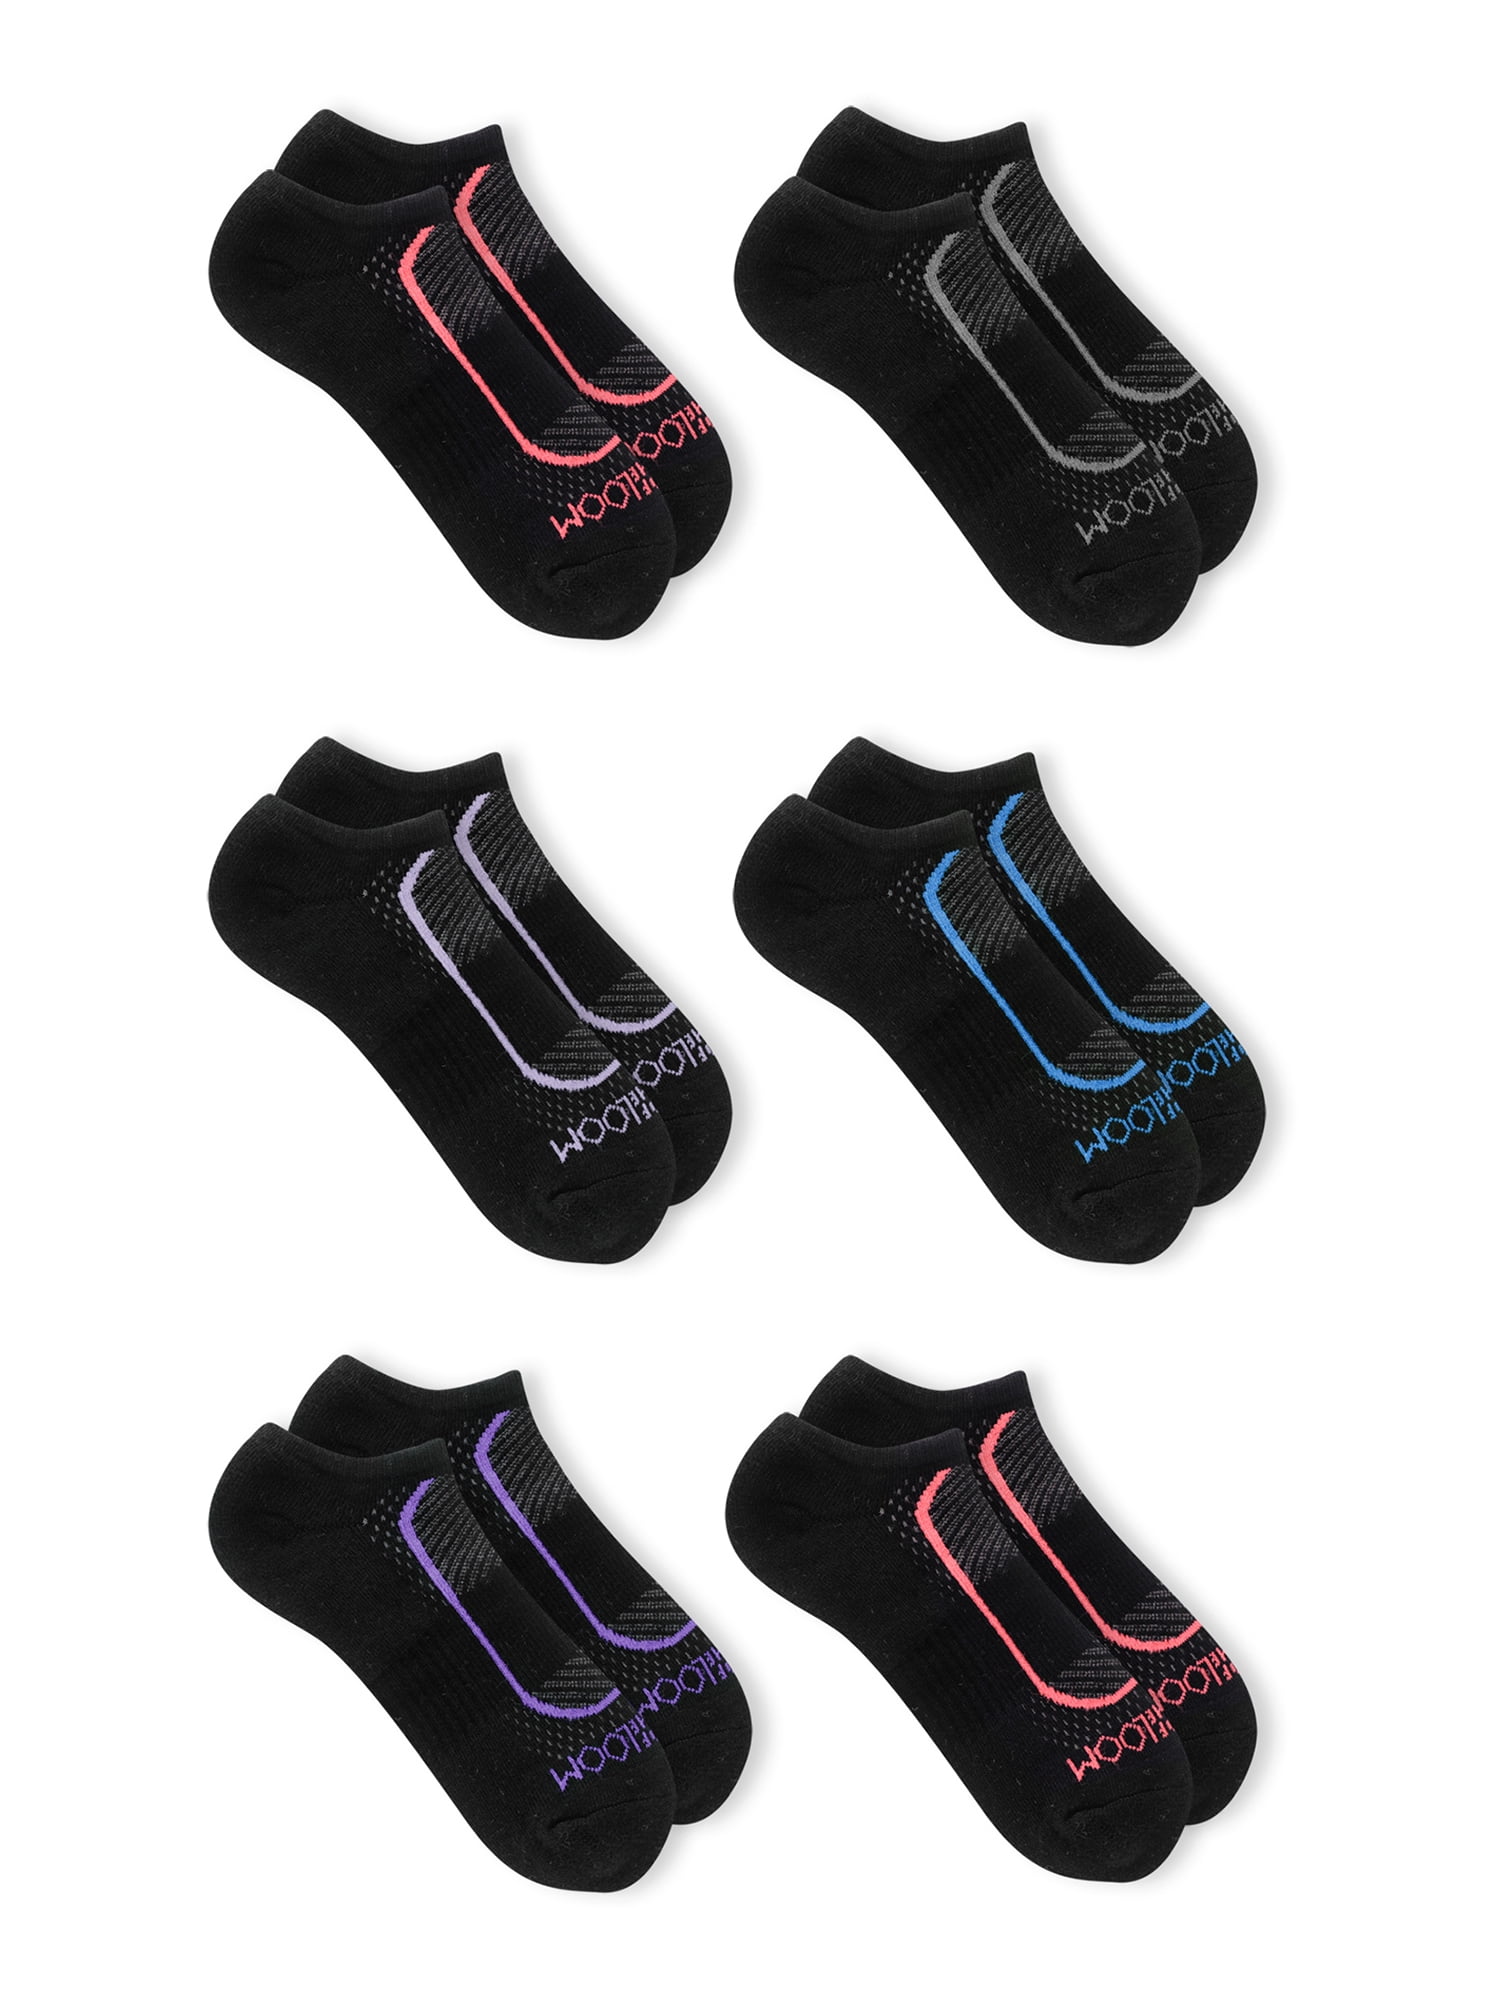 with Cushion and Arch Support 6 Pack Fruit of the Loom Mens No Show Socks 